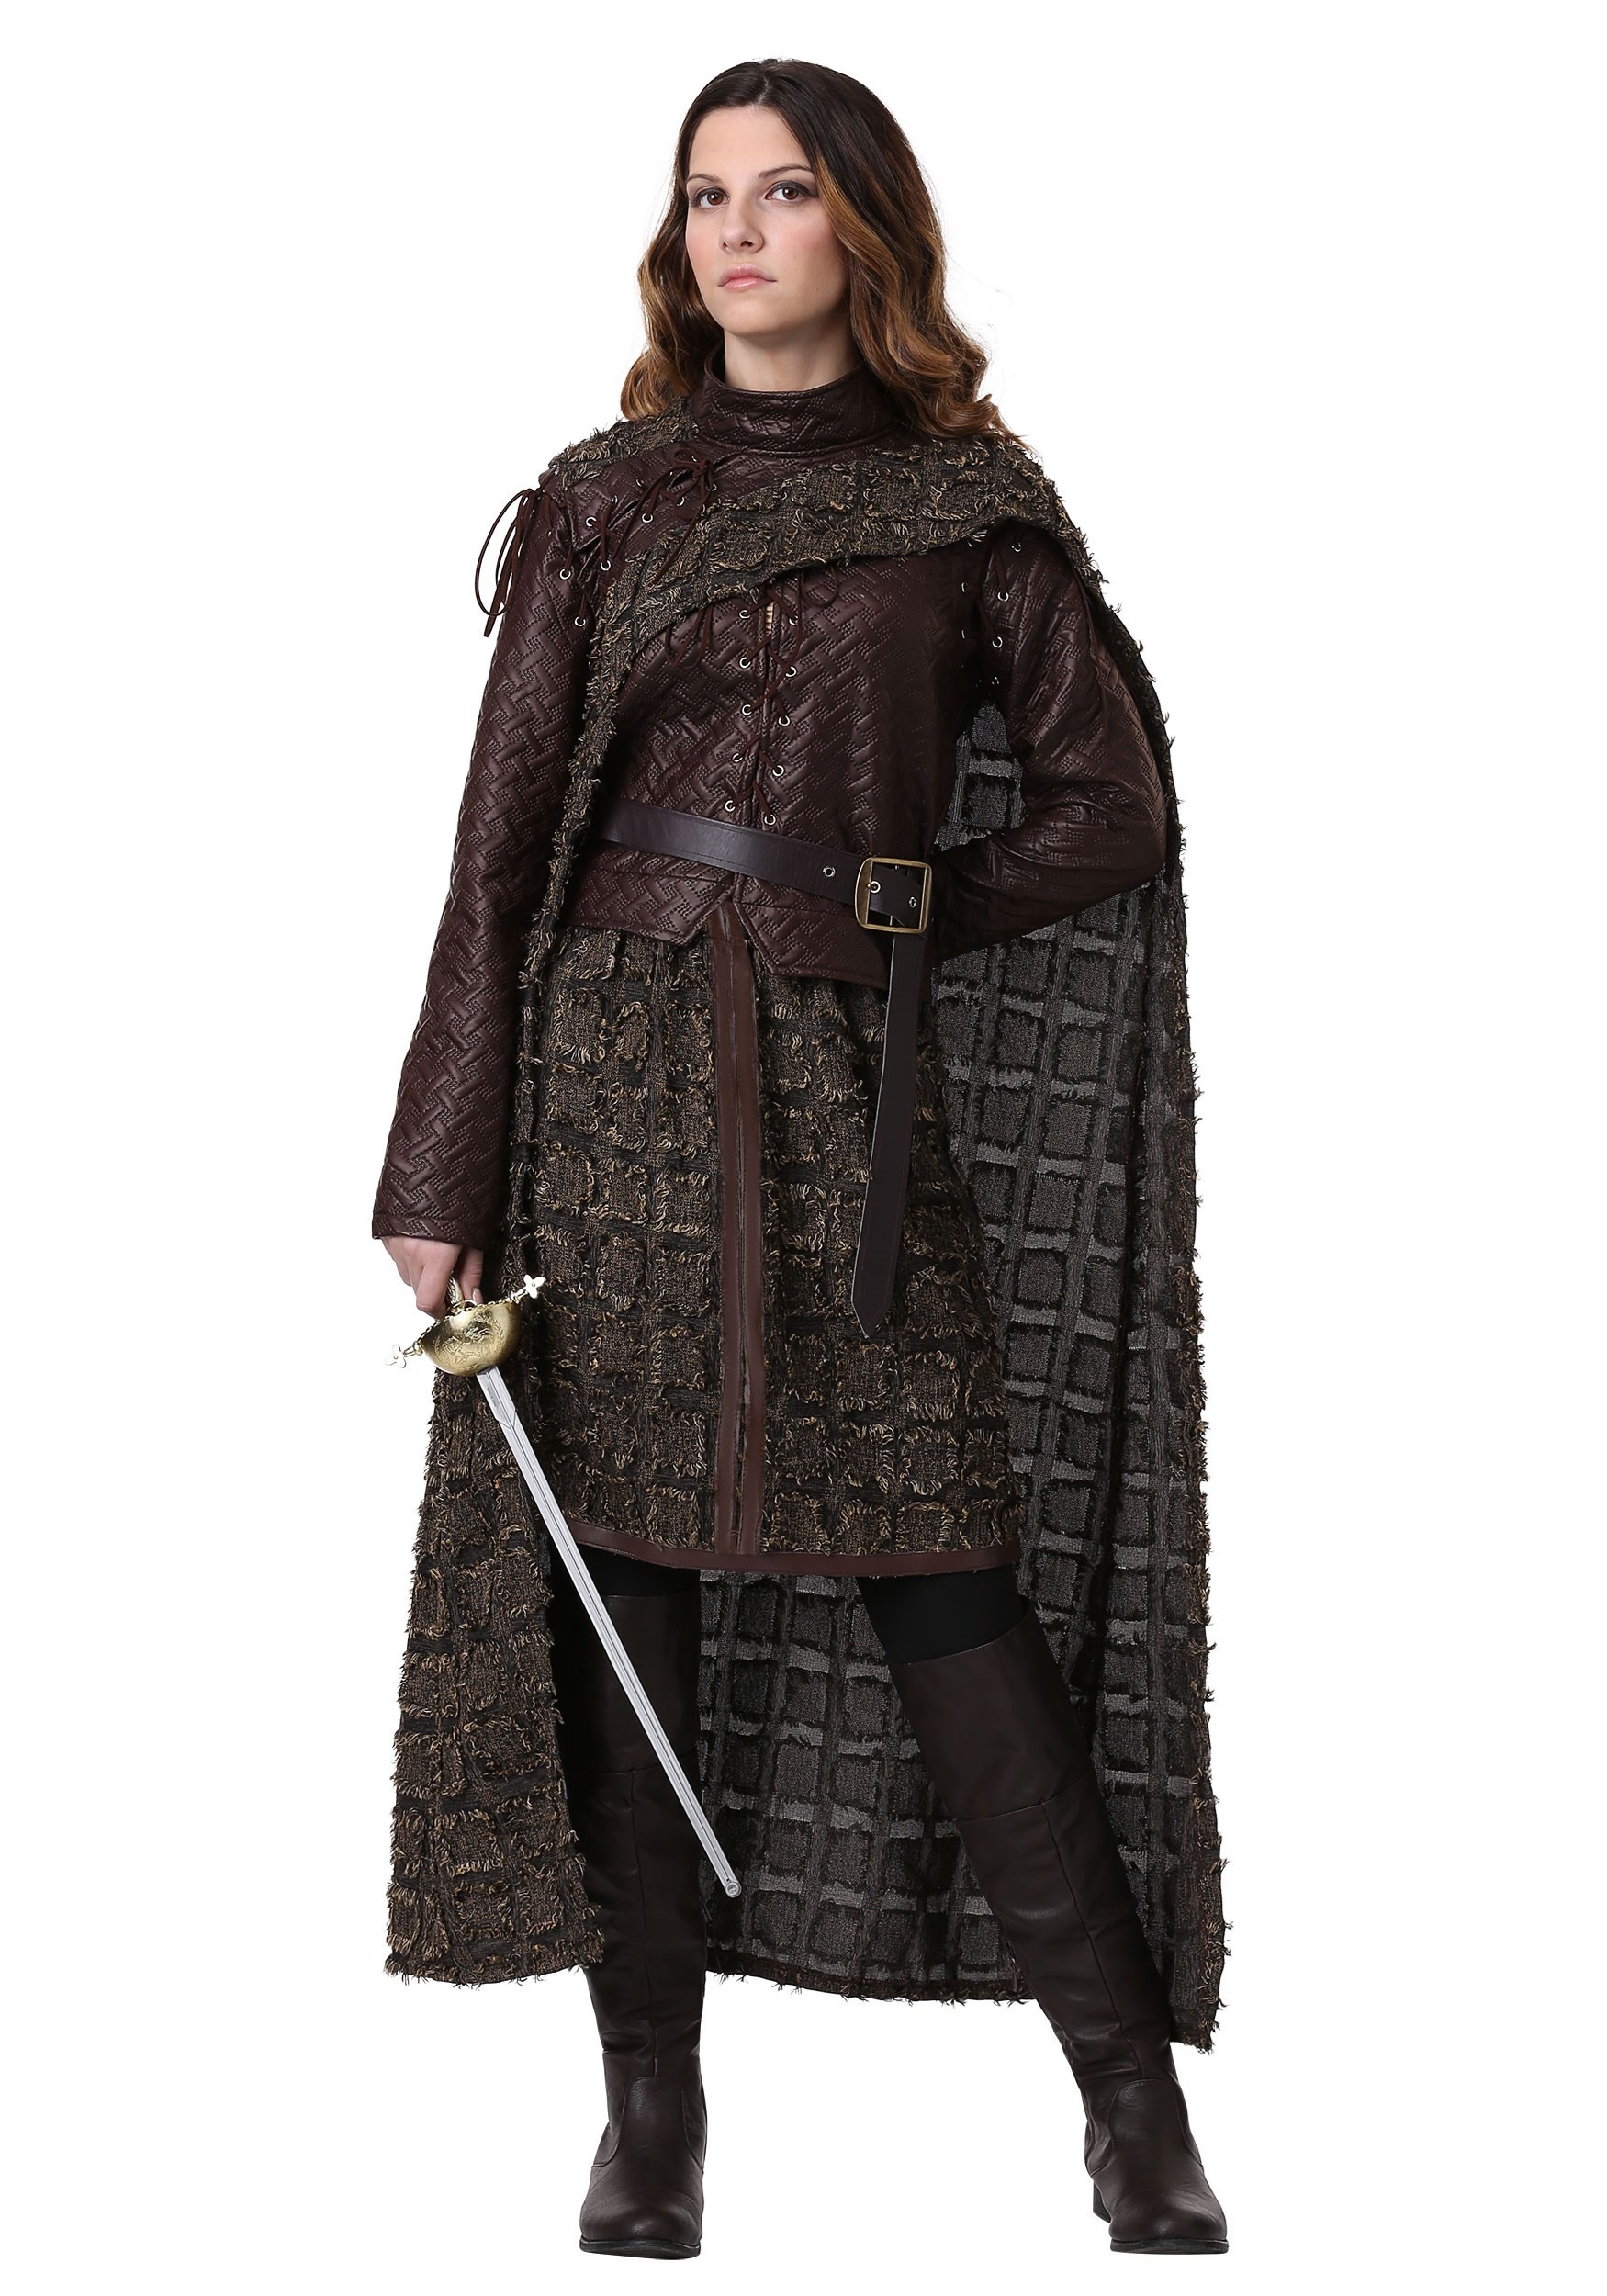 Image of Plus Size Winter Warrior Costume for Women ID FUN6363PL-2X